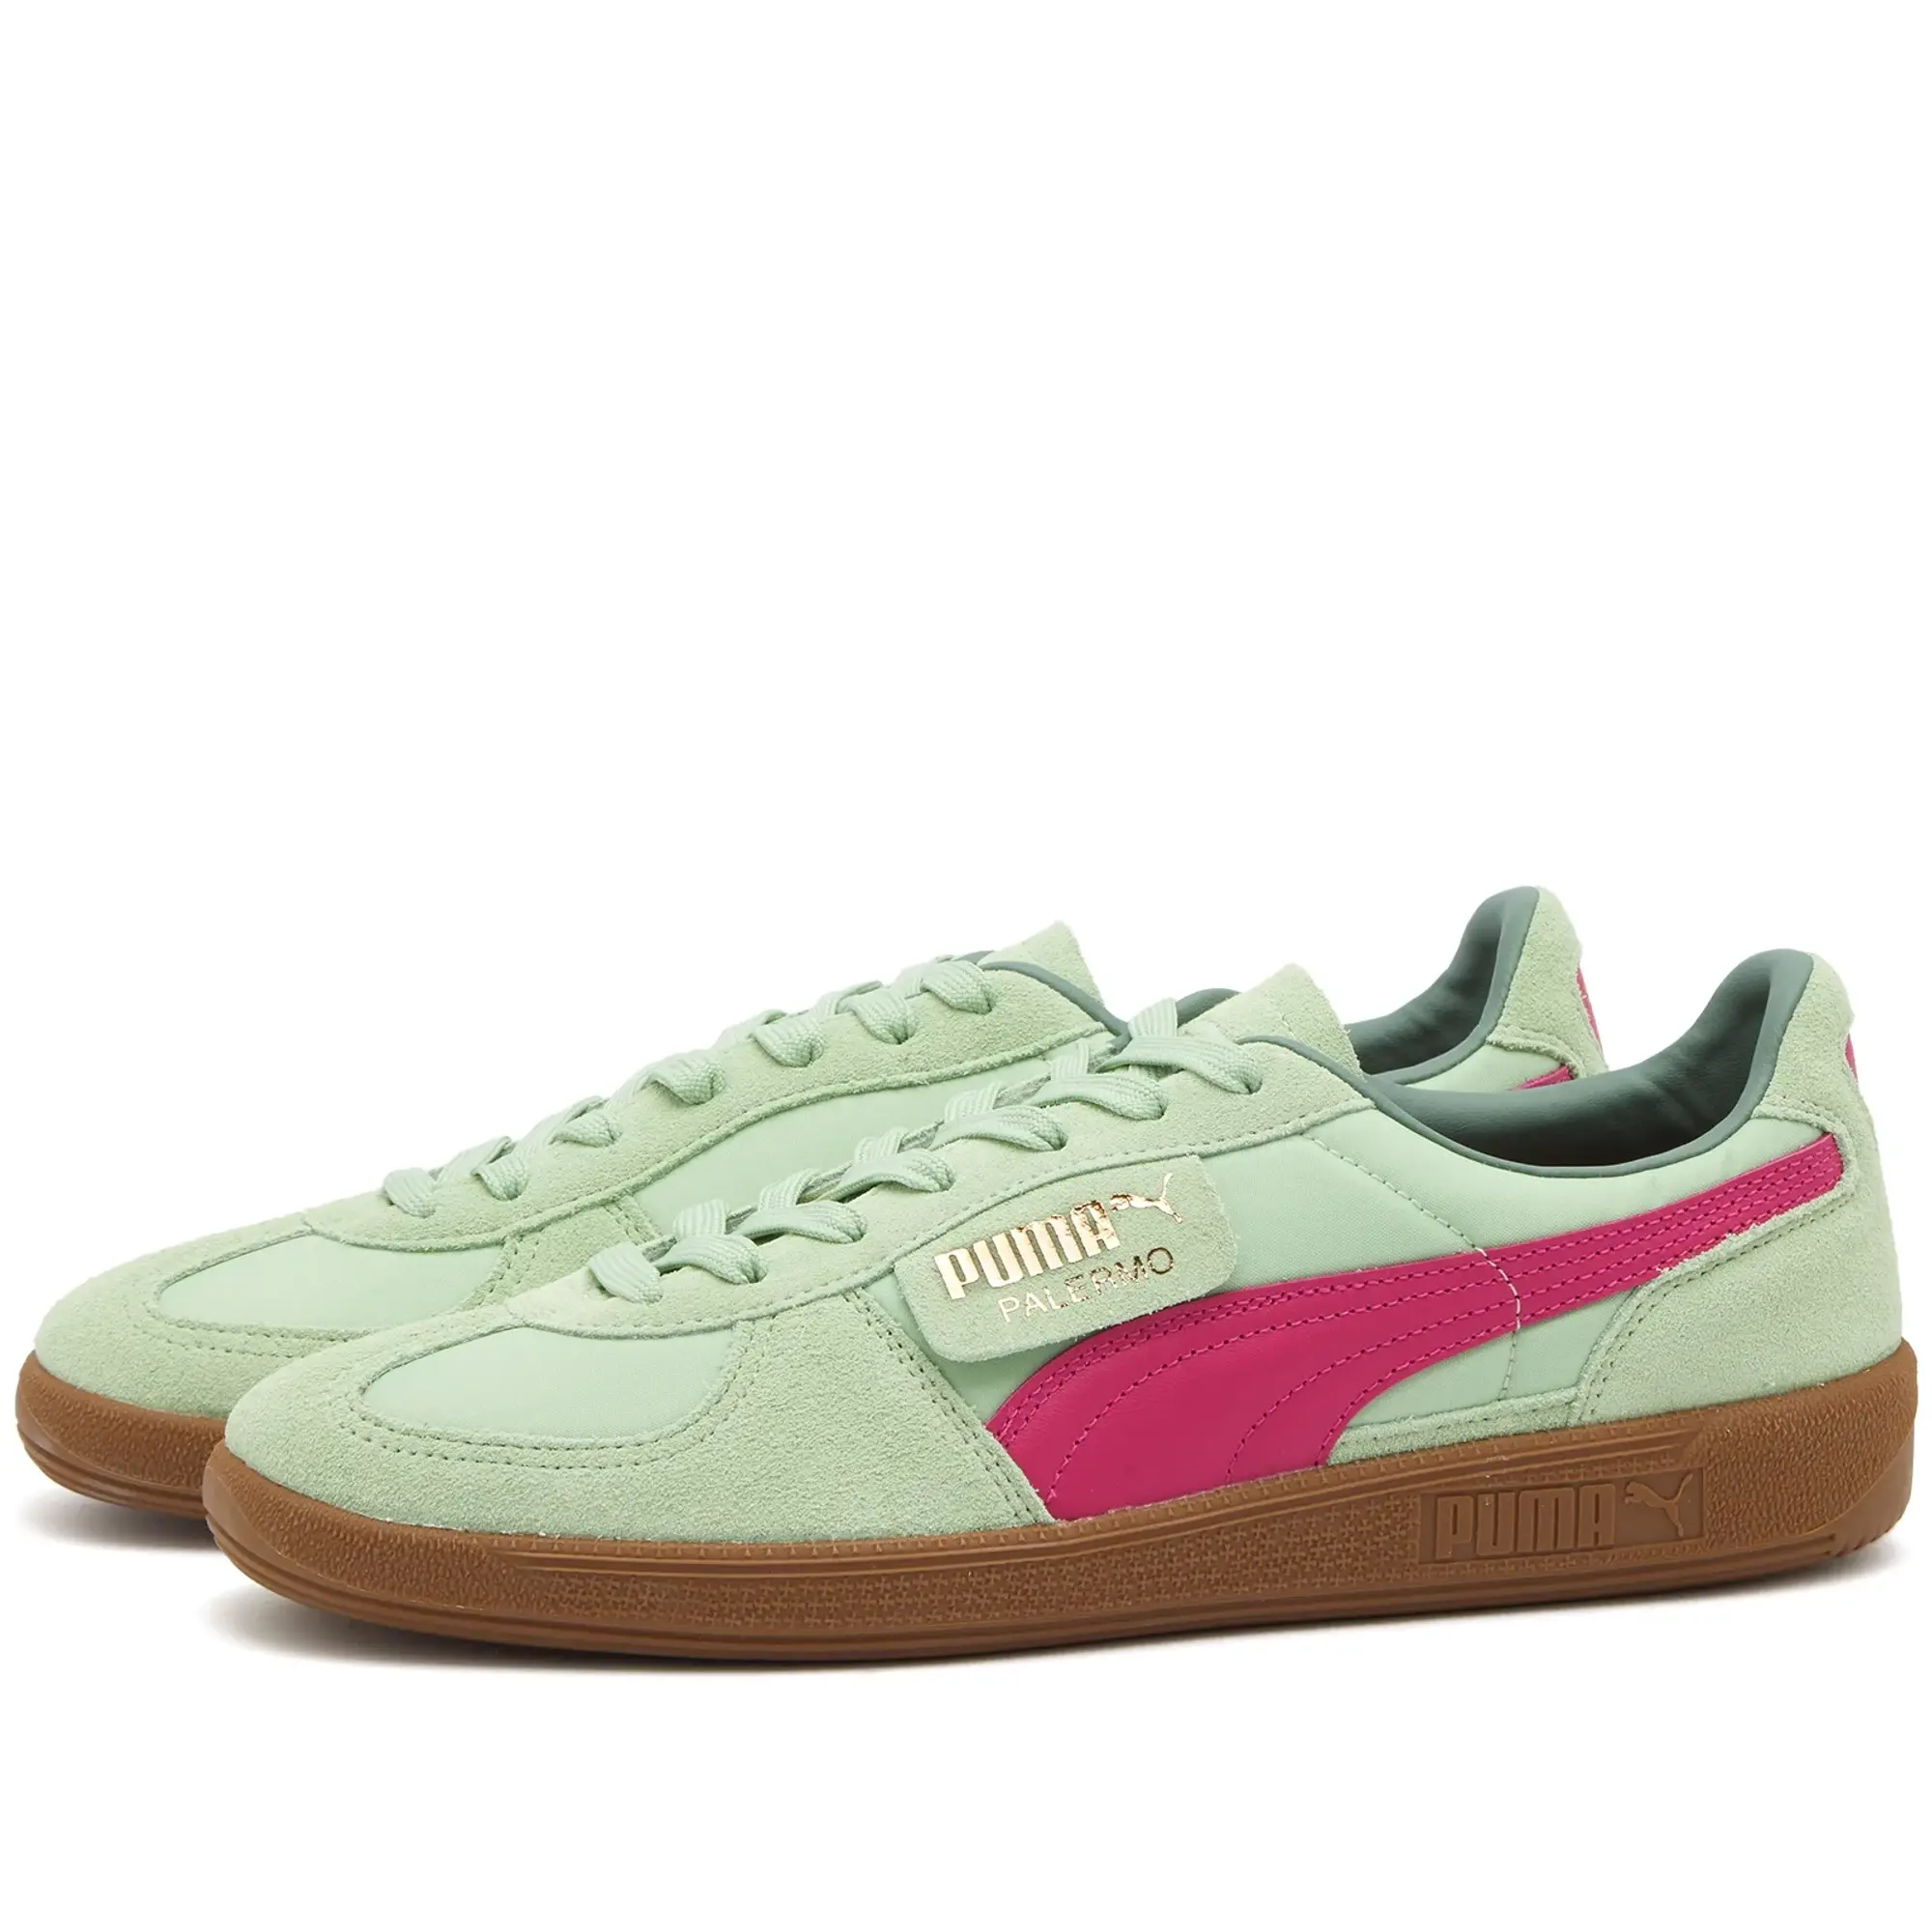 PUMA Palermo OG Sneakers, Light Mint/Orchid Shadow/Gum